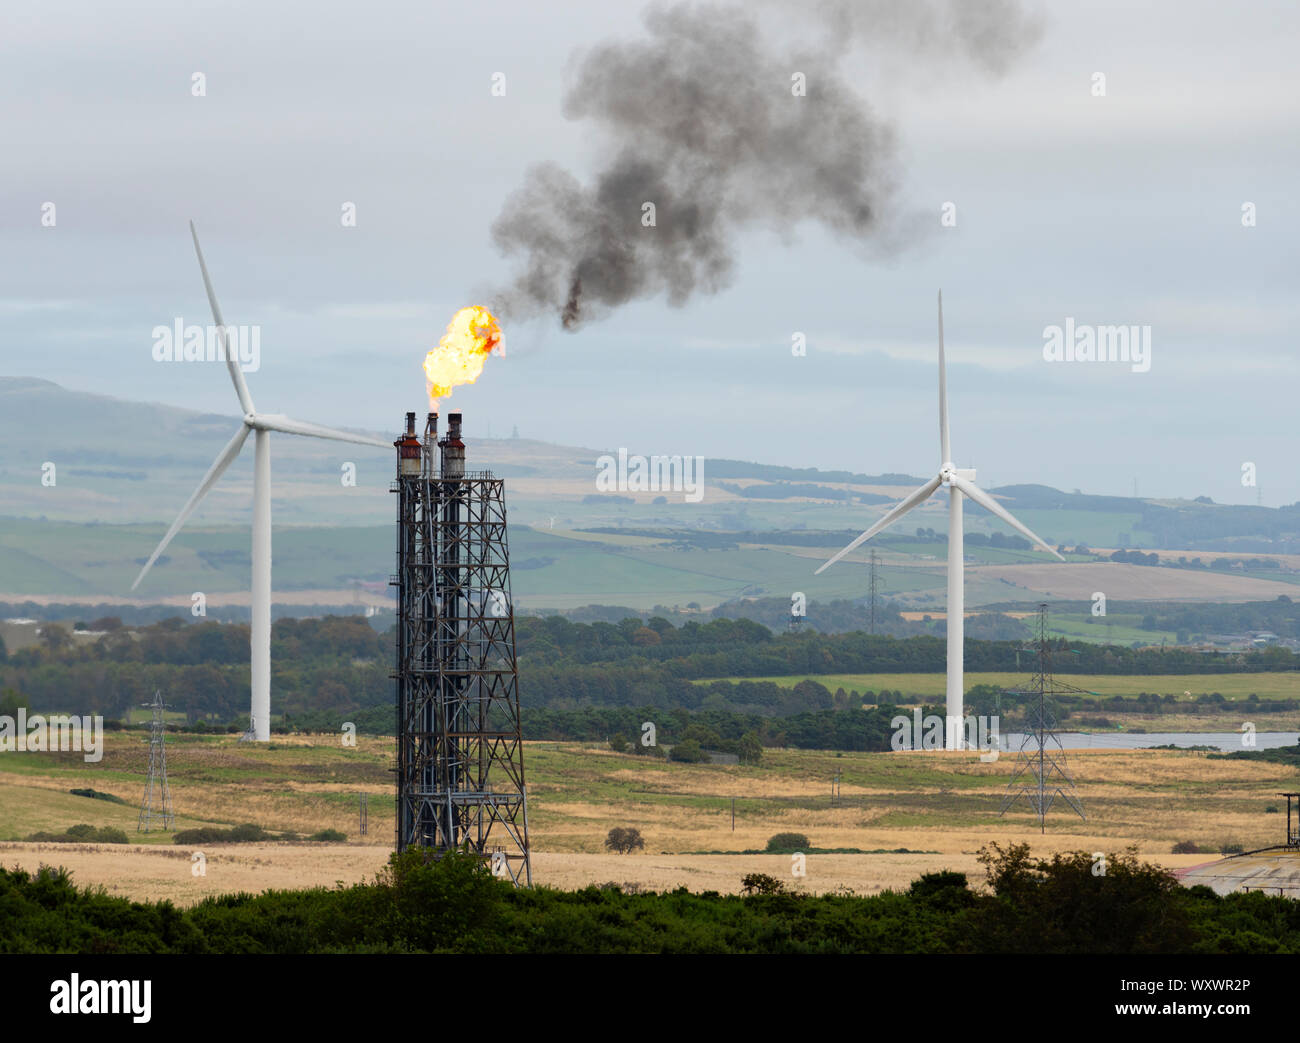 View of flaring at Mossmorran NGL ethylene plant on 18th September 2019 in Fife, Scotland, UK. The plant is jointly operated by ExxonMobil and Shell U Stock Photo